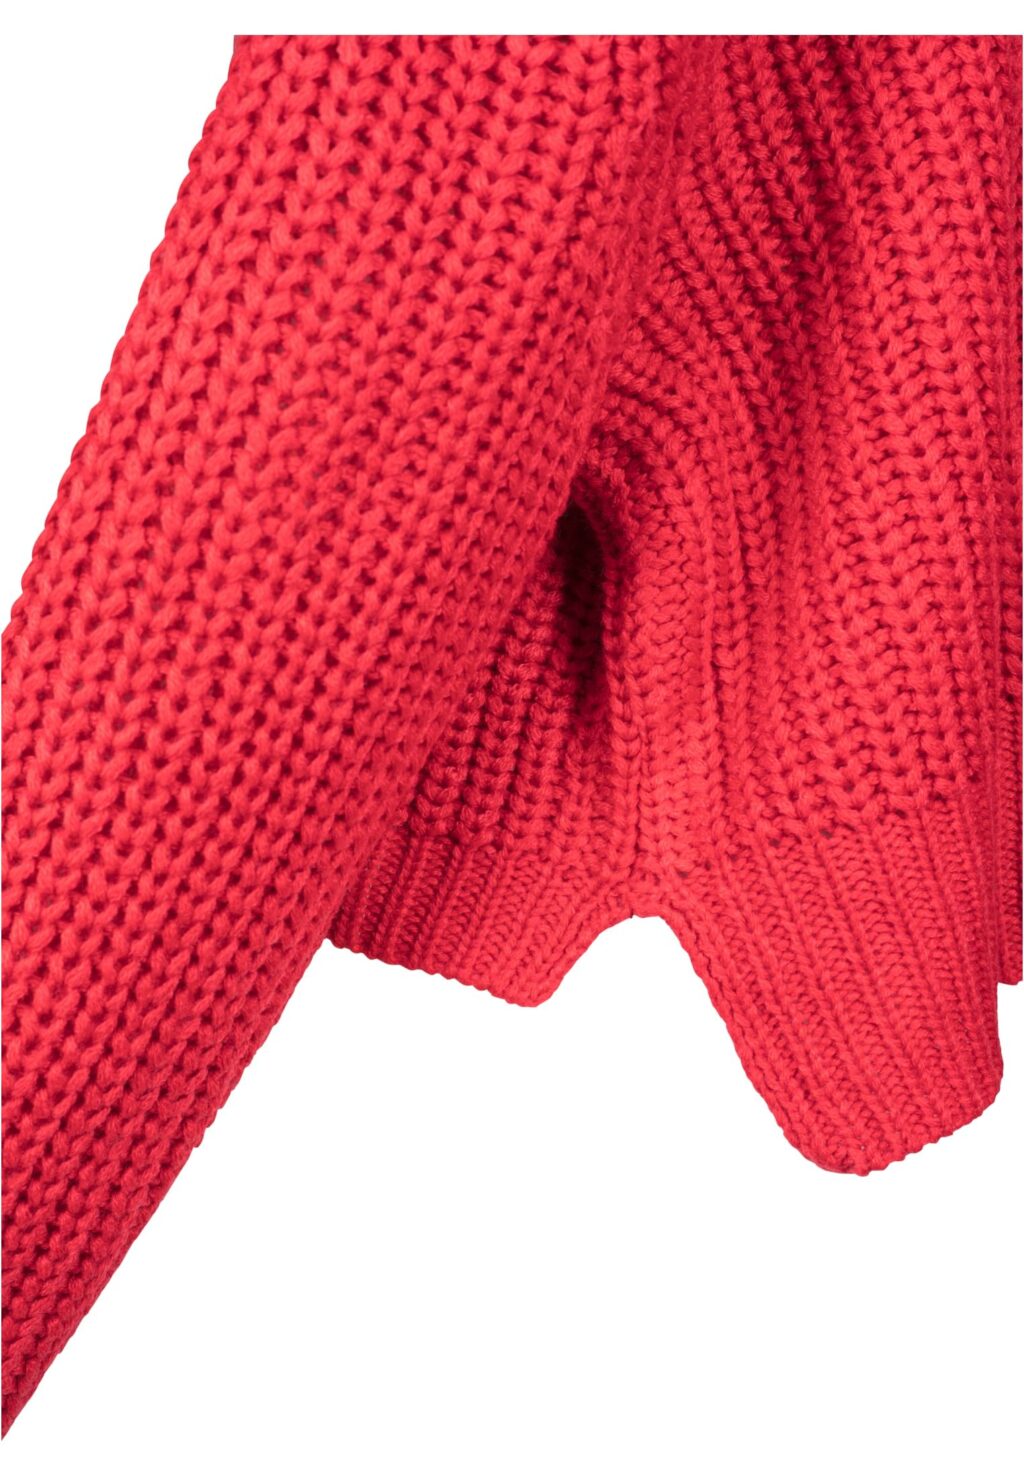 Urban Classics Ladies Wide Oversize Sweater fire red TB2359